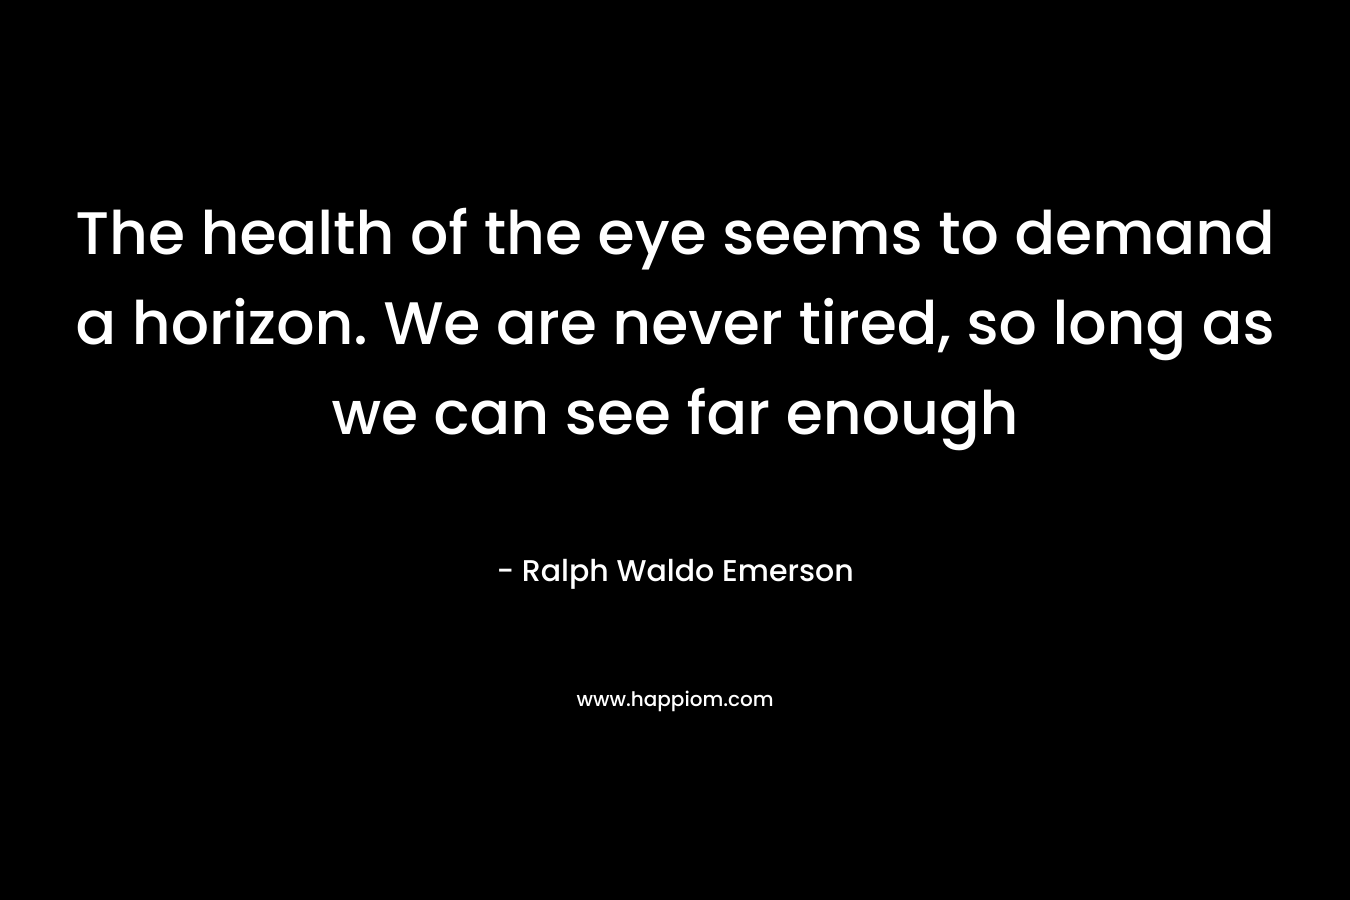 The health of the eye seems to demand a horizon. We are never tired, so long as we can see far enough